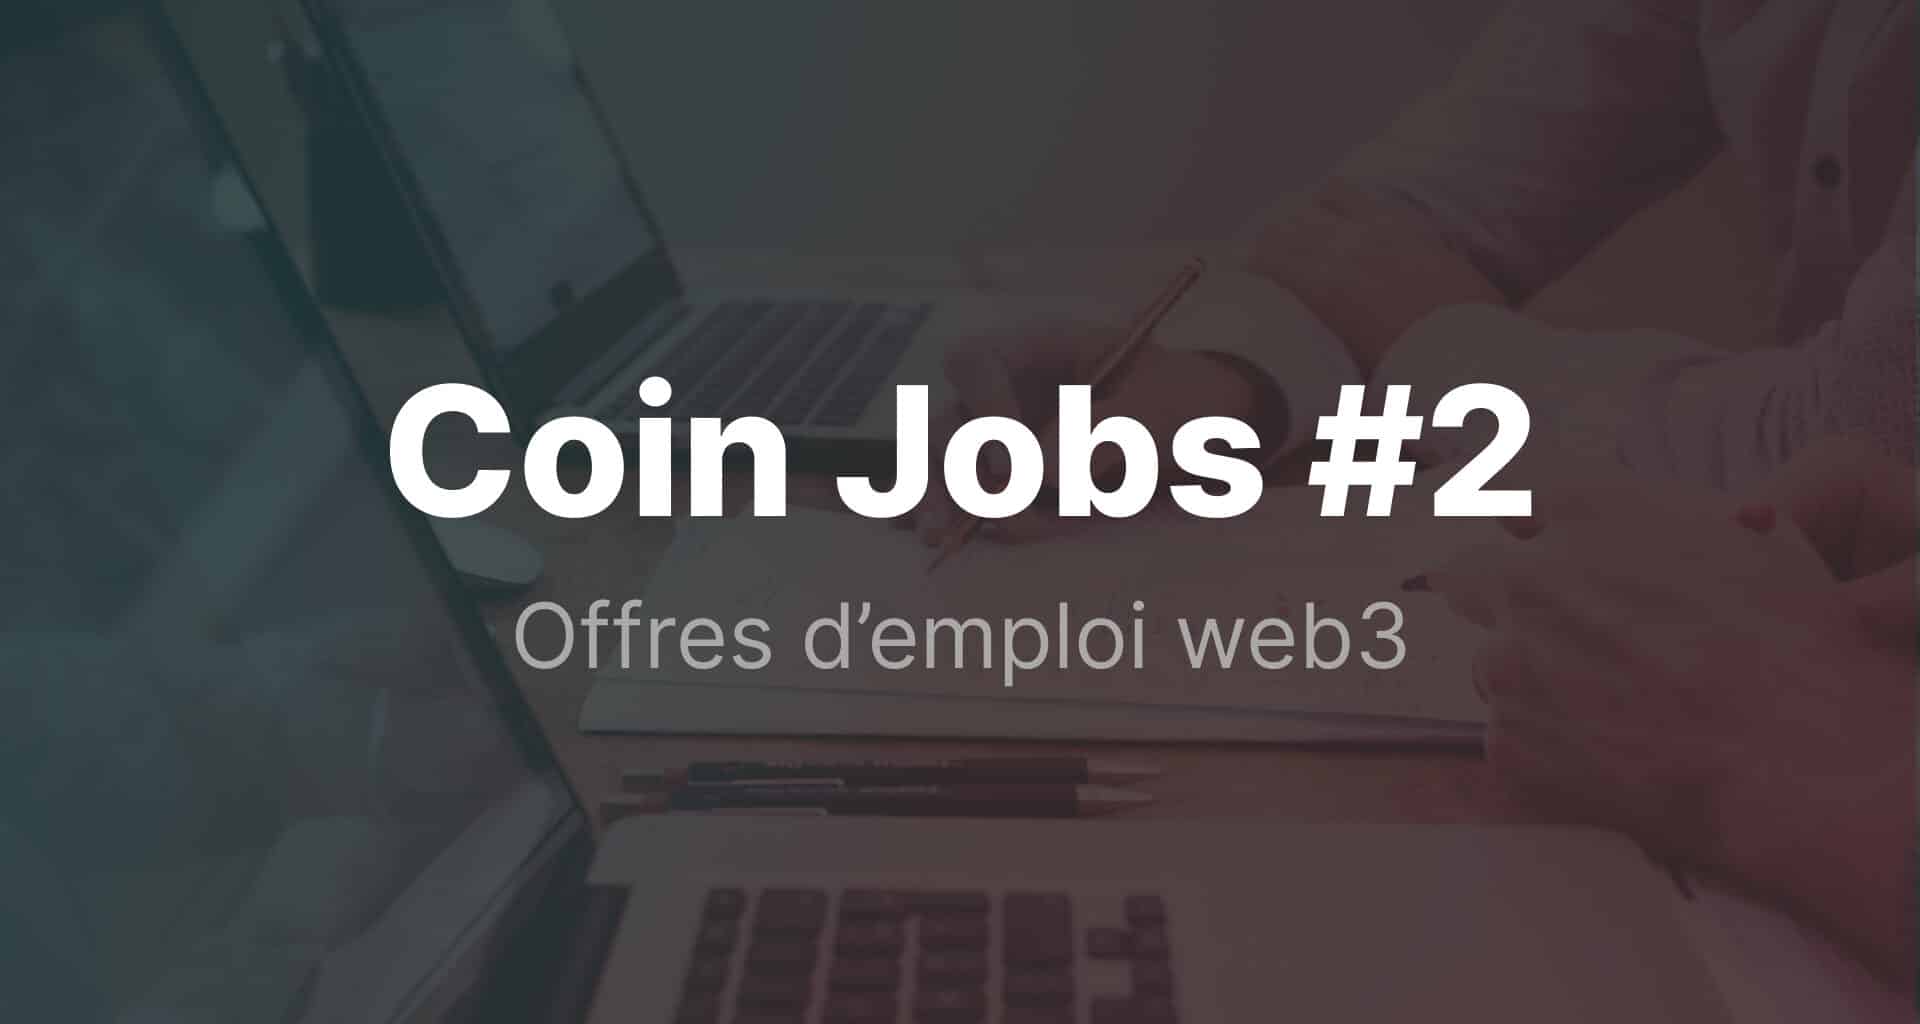 CoinJobs offre d'emploi web3